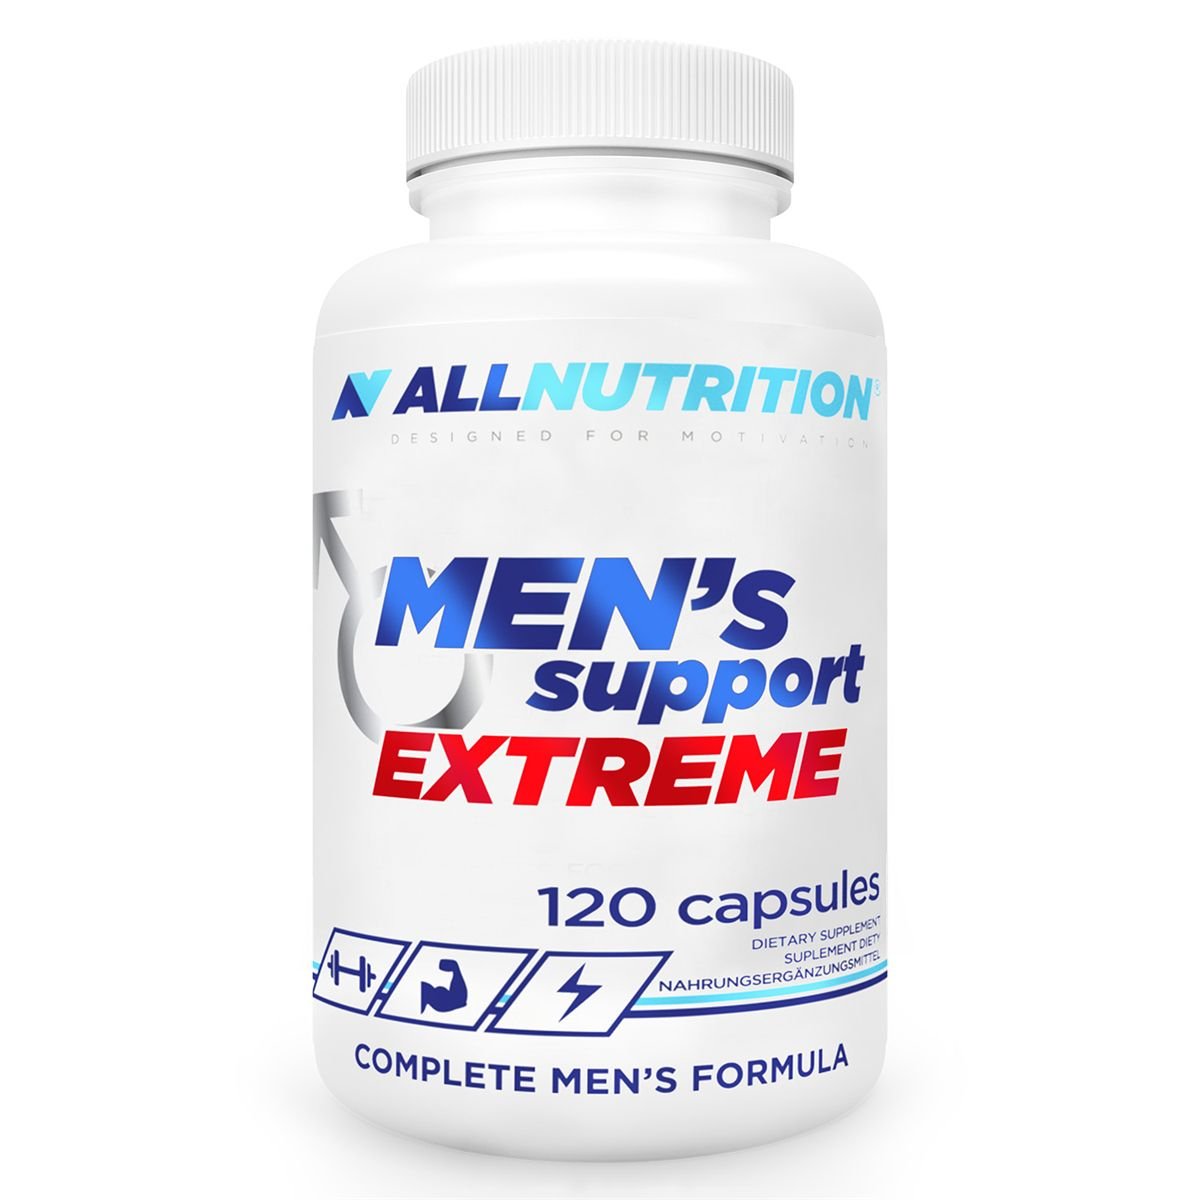 Натуральная добавка AllNutrition Men's Support Extreme, 120 капсул,  ml, AllNutrition. Natural Products. General Health 